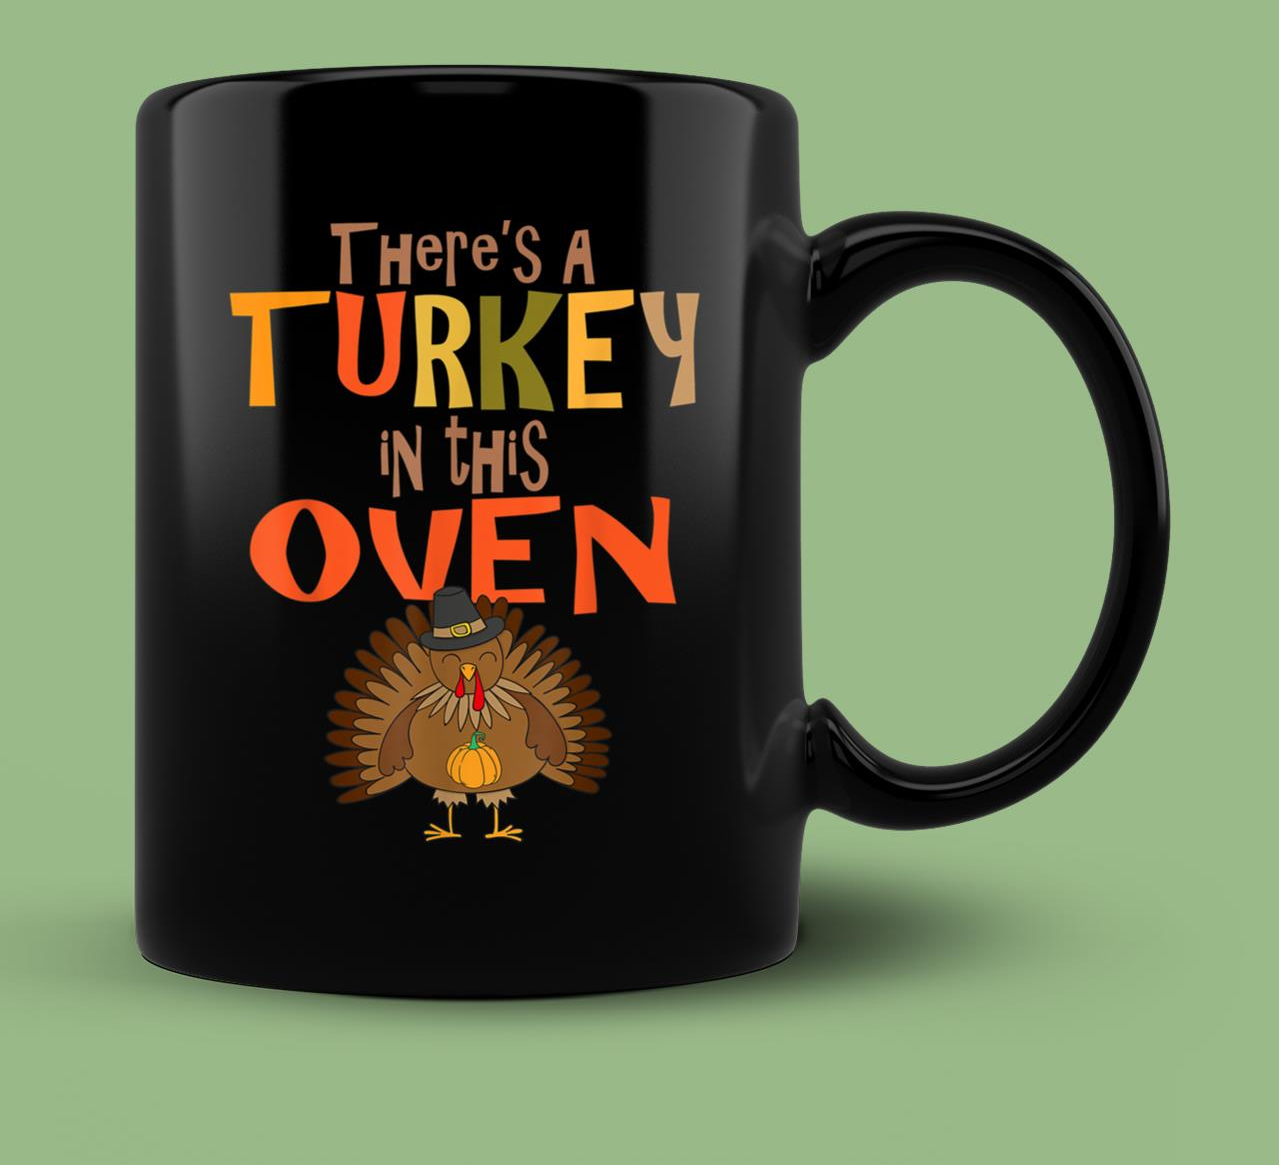 Skitongift Ceramic Novelty Coffee Mug Thanksgiving Pregnancy Mug There’S A Turkey In This Oven